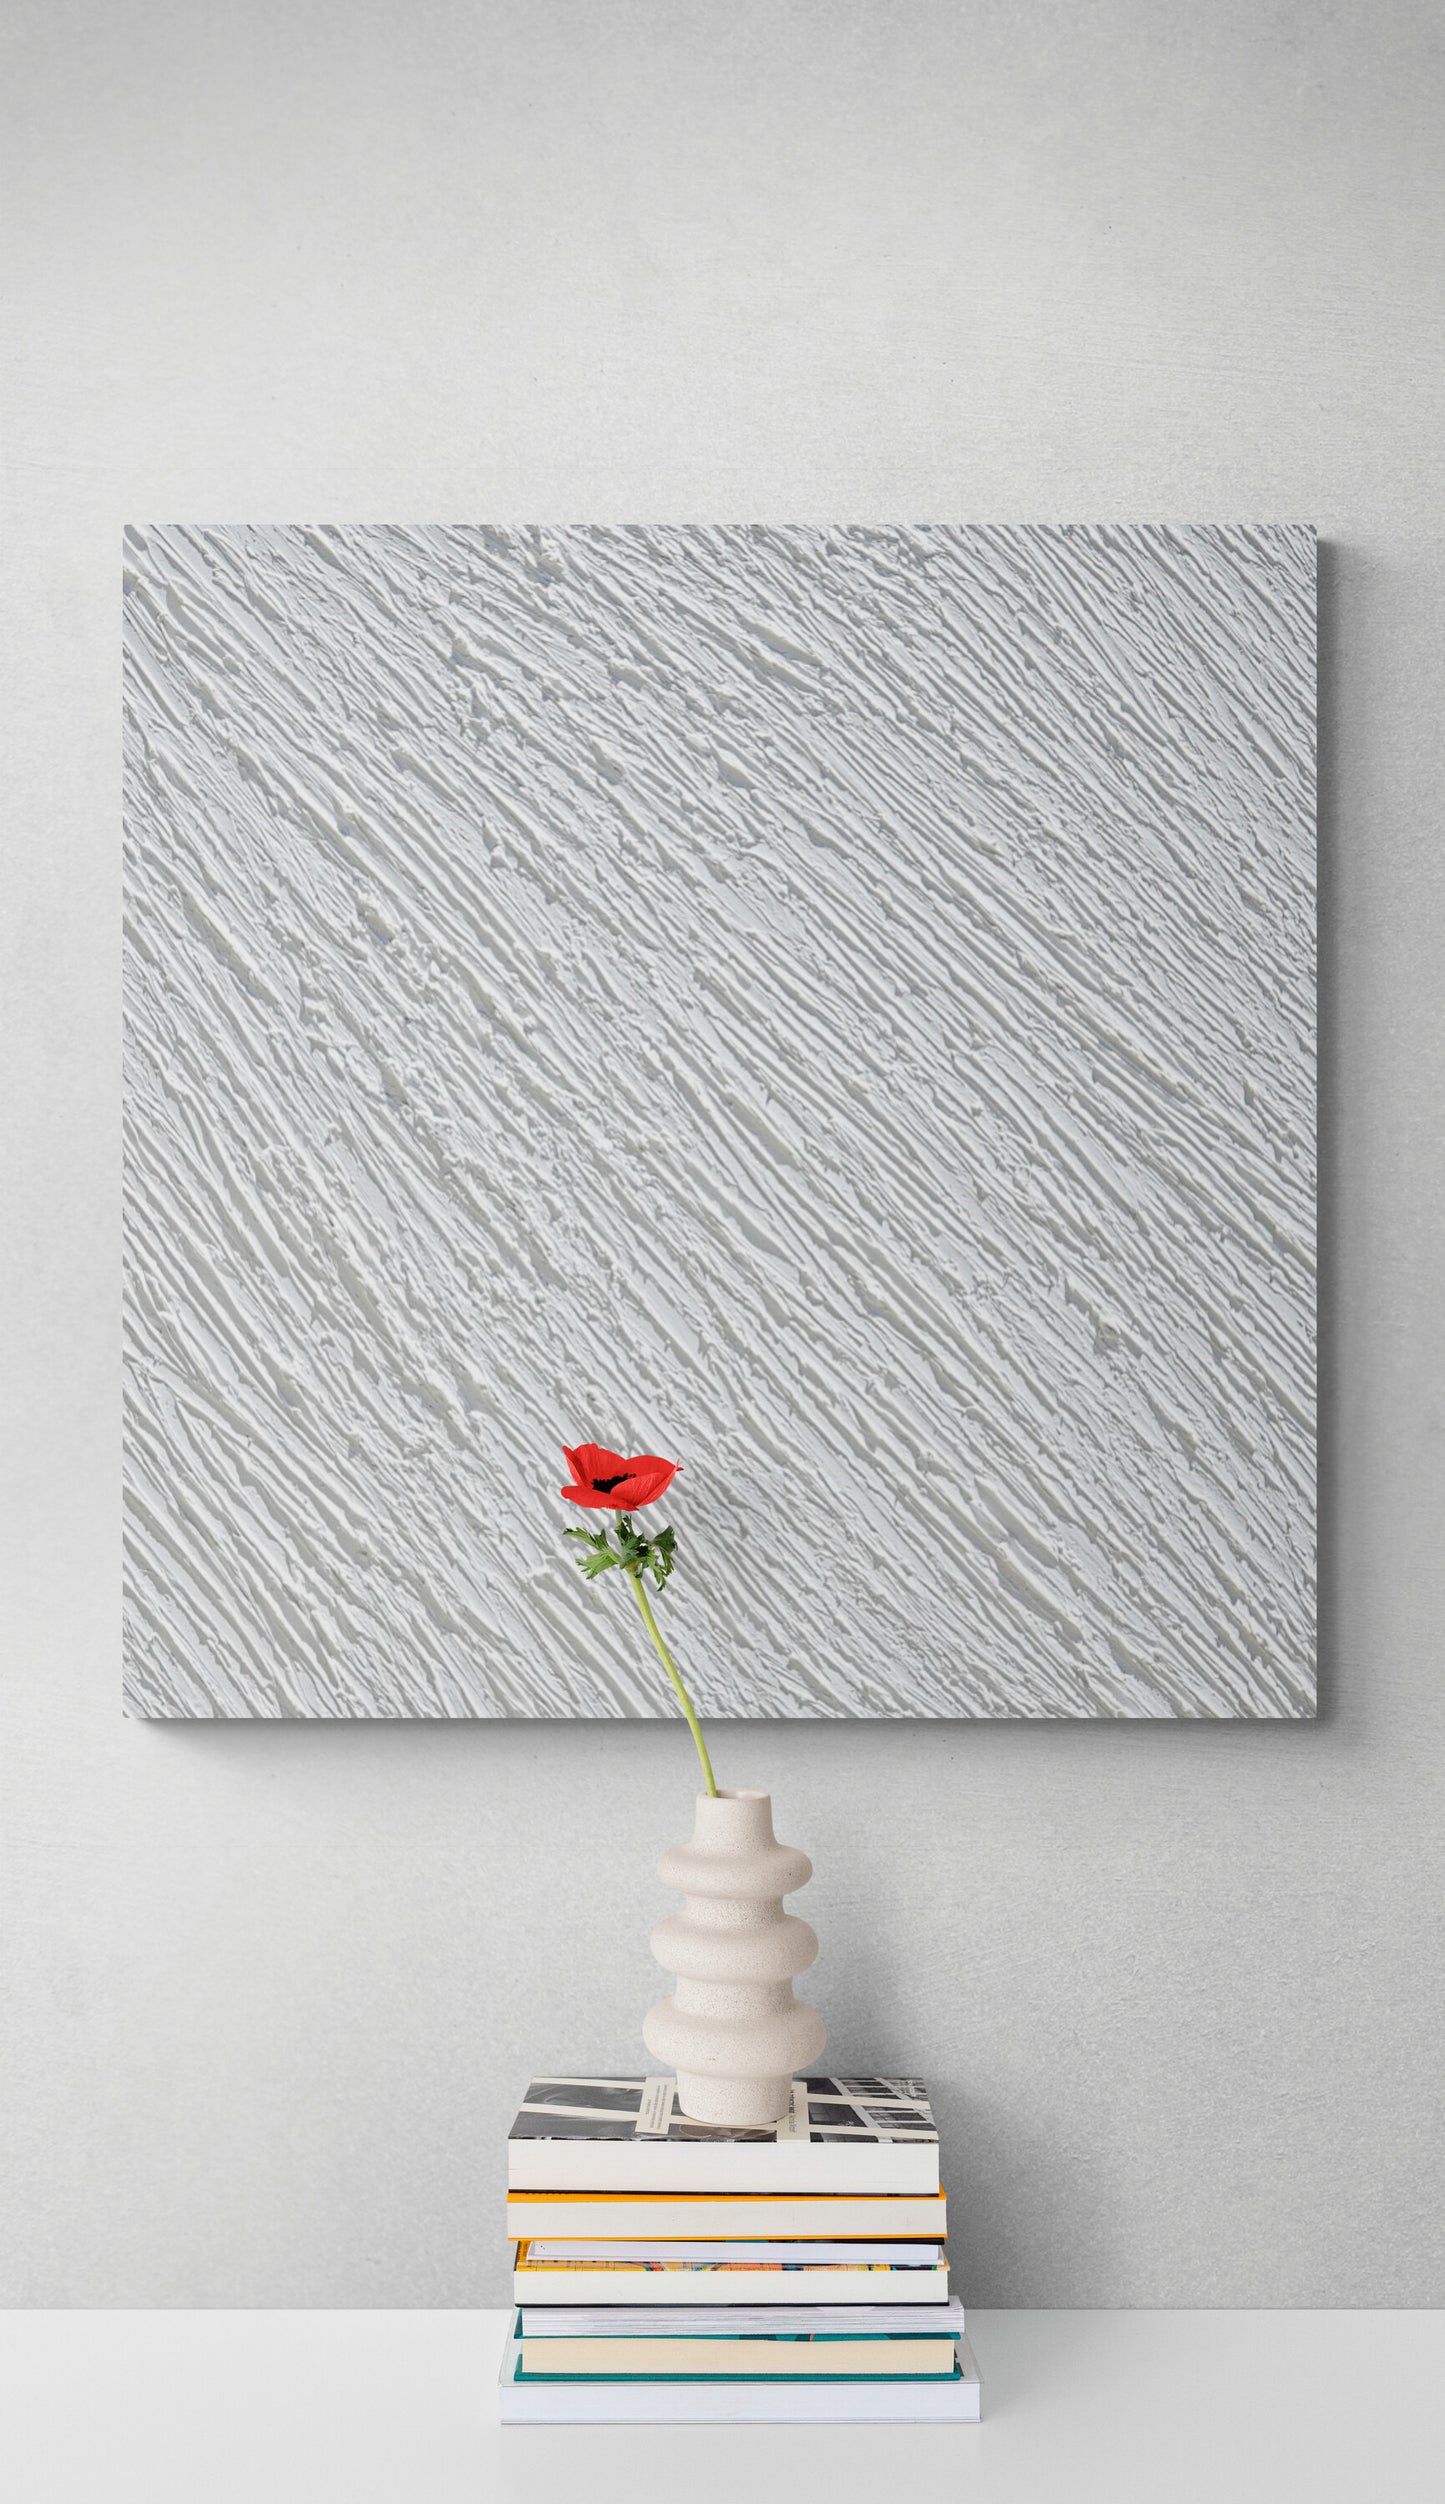 Abstraction WHITE 5 https://www.sophiahyunart.com/products/abstraction-white-5 Original Abstract Painting relief on canvas 20" x 20"&nbsp; Unframed Hand Signed by Artist and Dated in the back&nbsp; Ready to hang Certificate of Authenticity&nbsp;